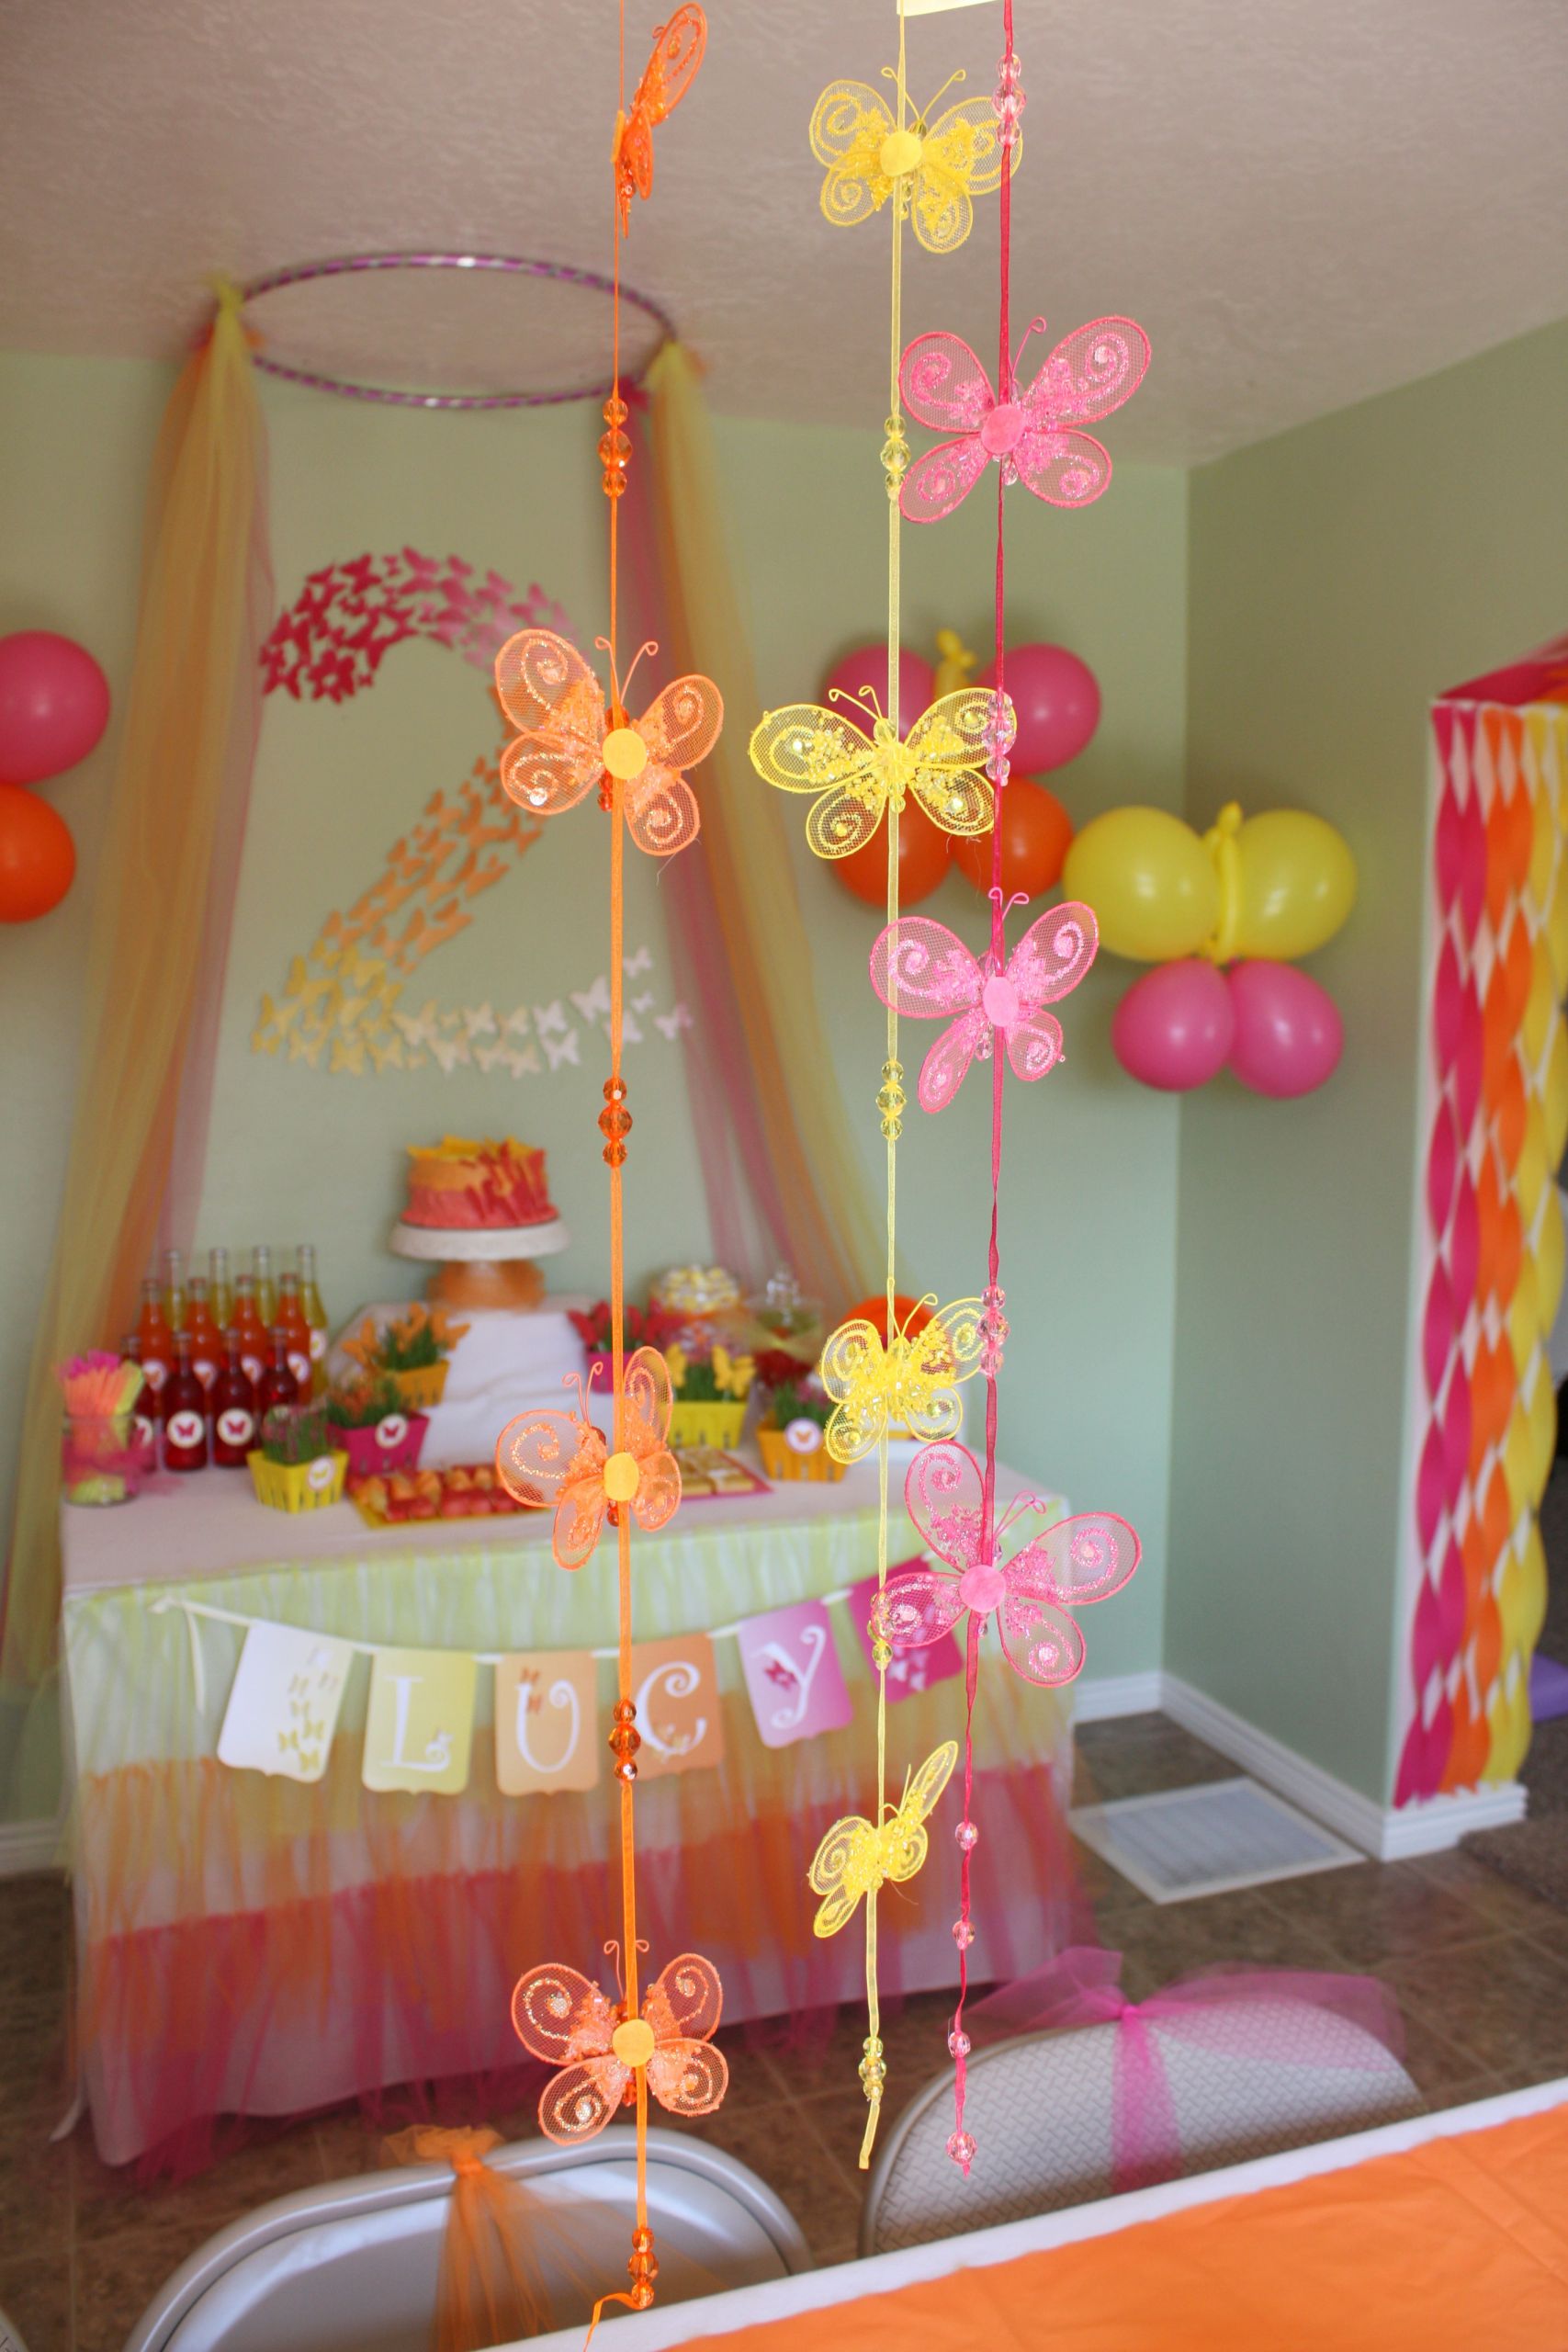 Decorating Ideas For Birthday Party
 Butterfly Themed Birthday Party Decorations